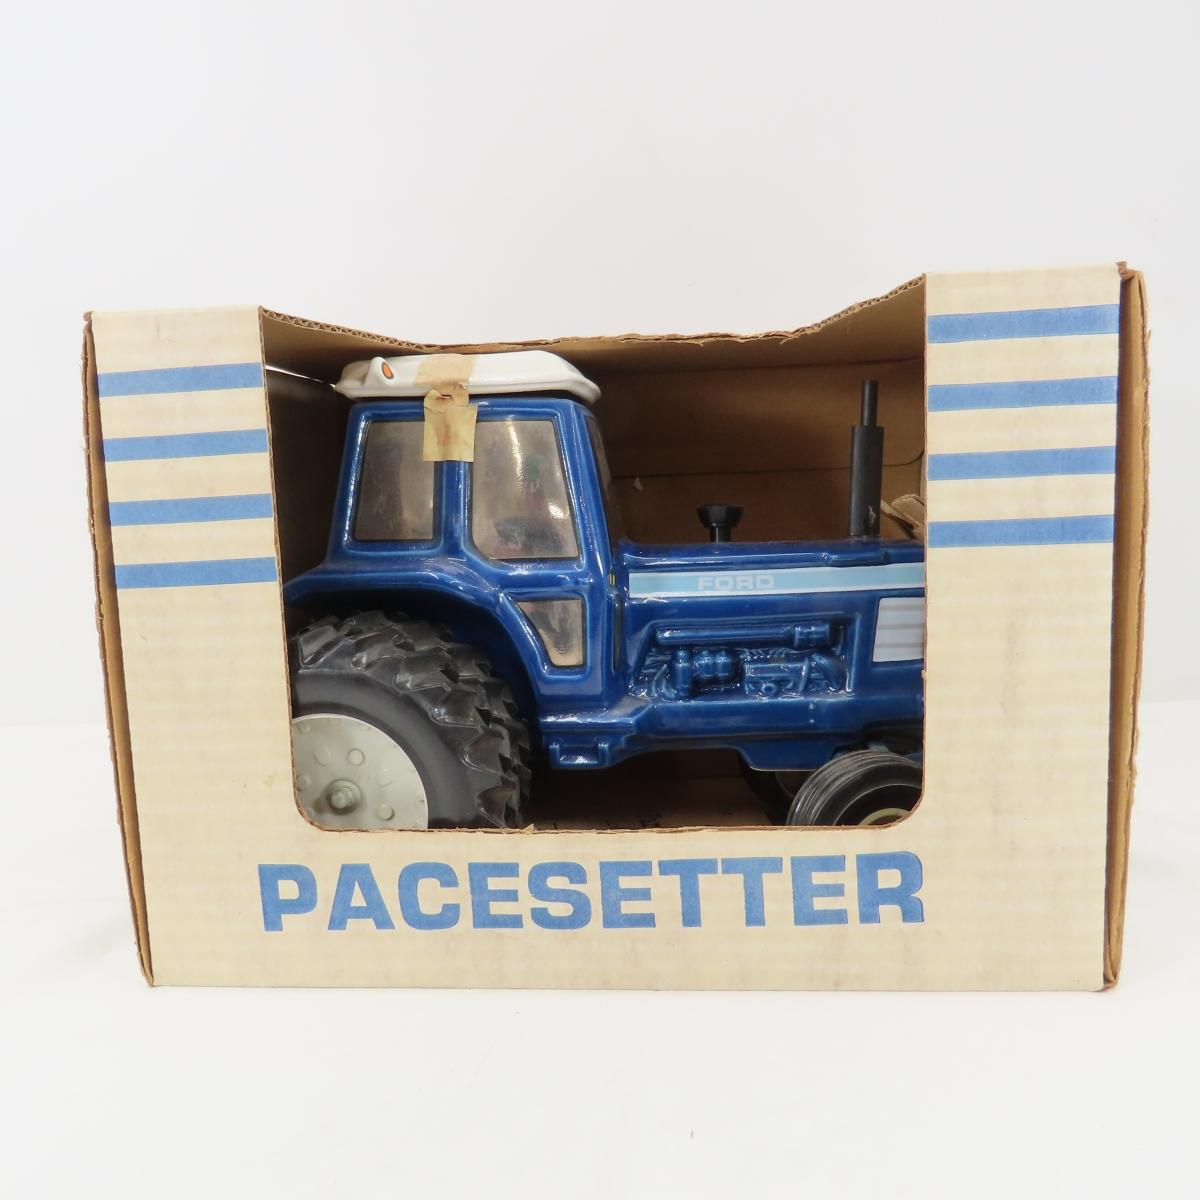 1983 Pacesetter Vodka Tractor Decanters #1, 2 & 3